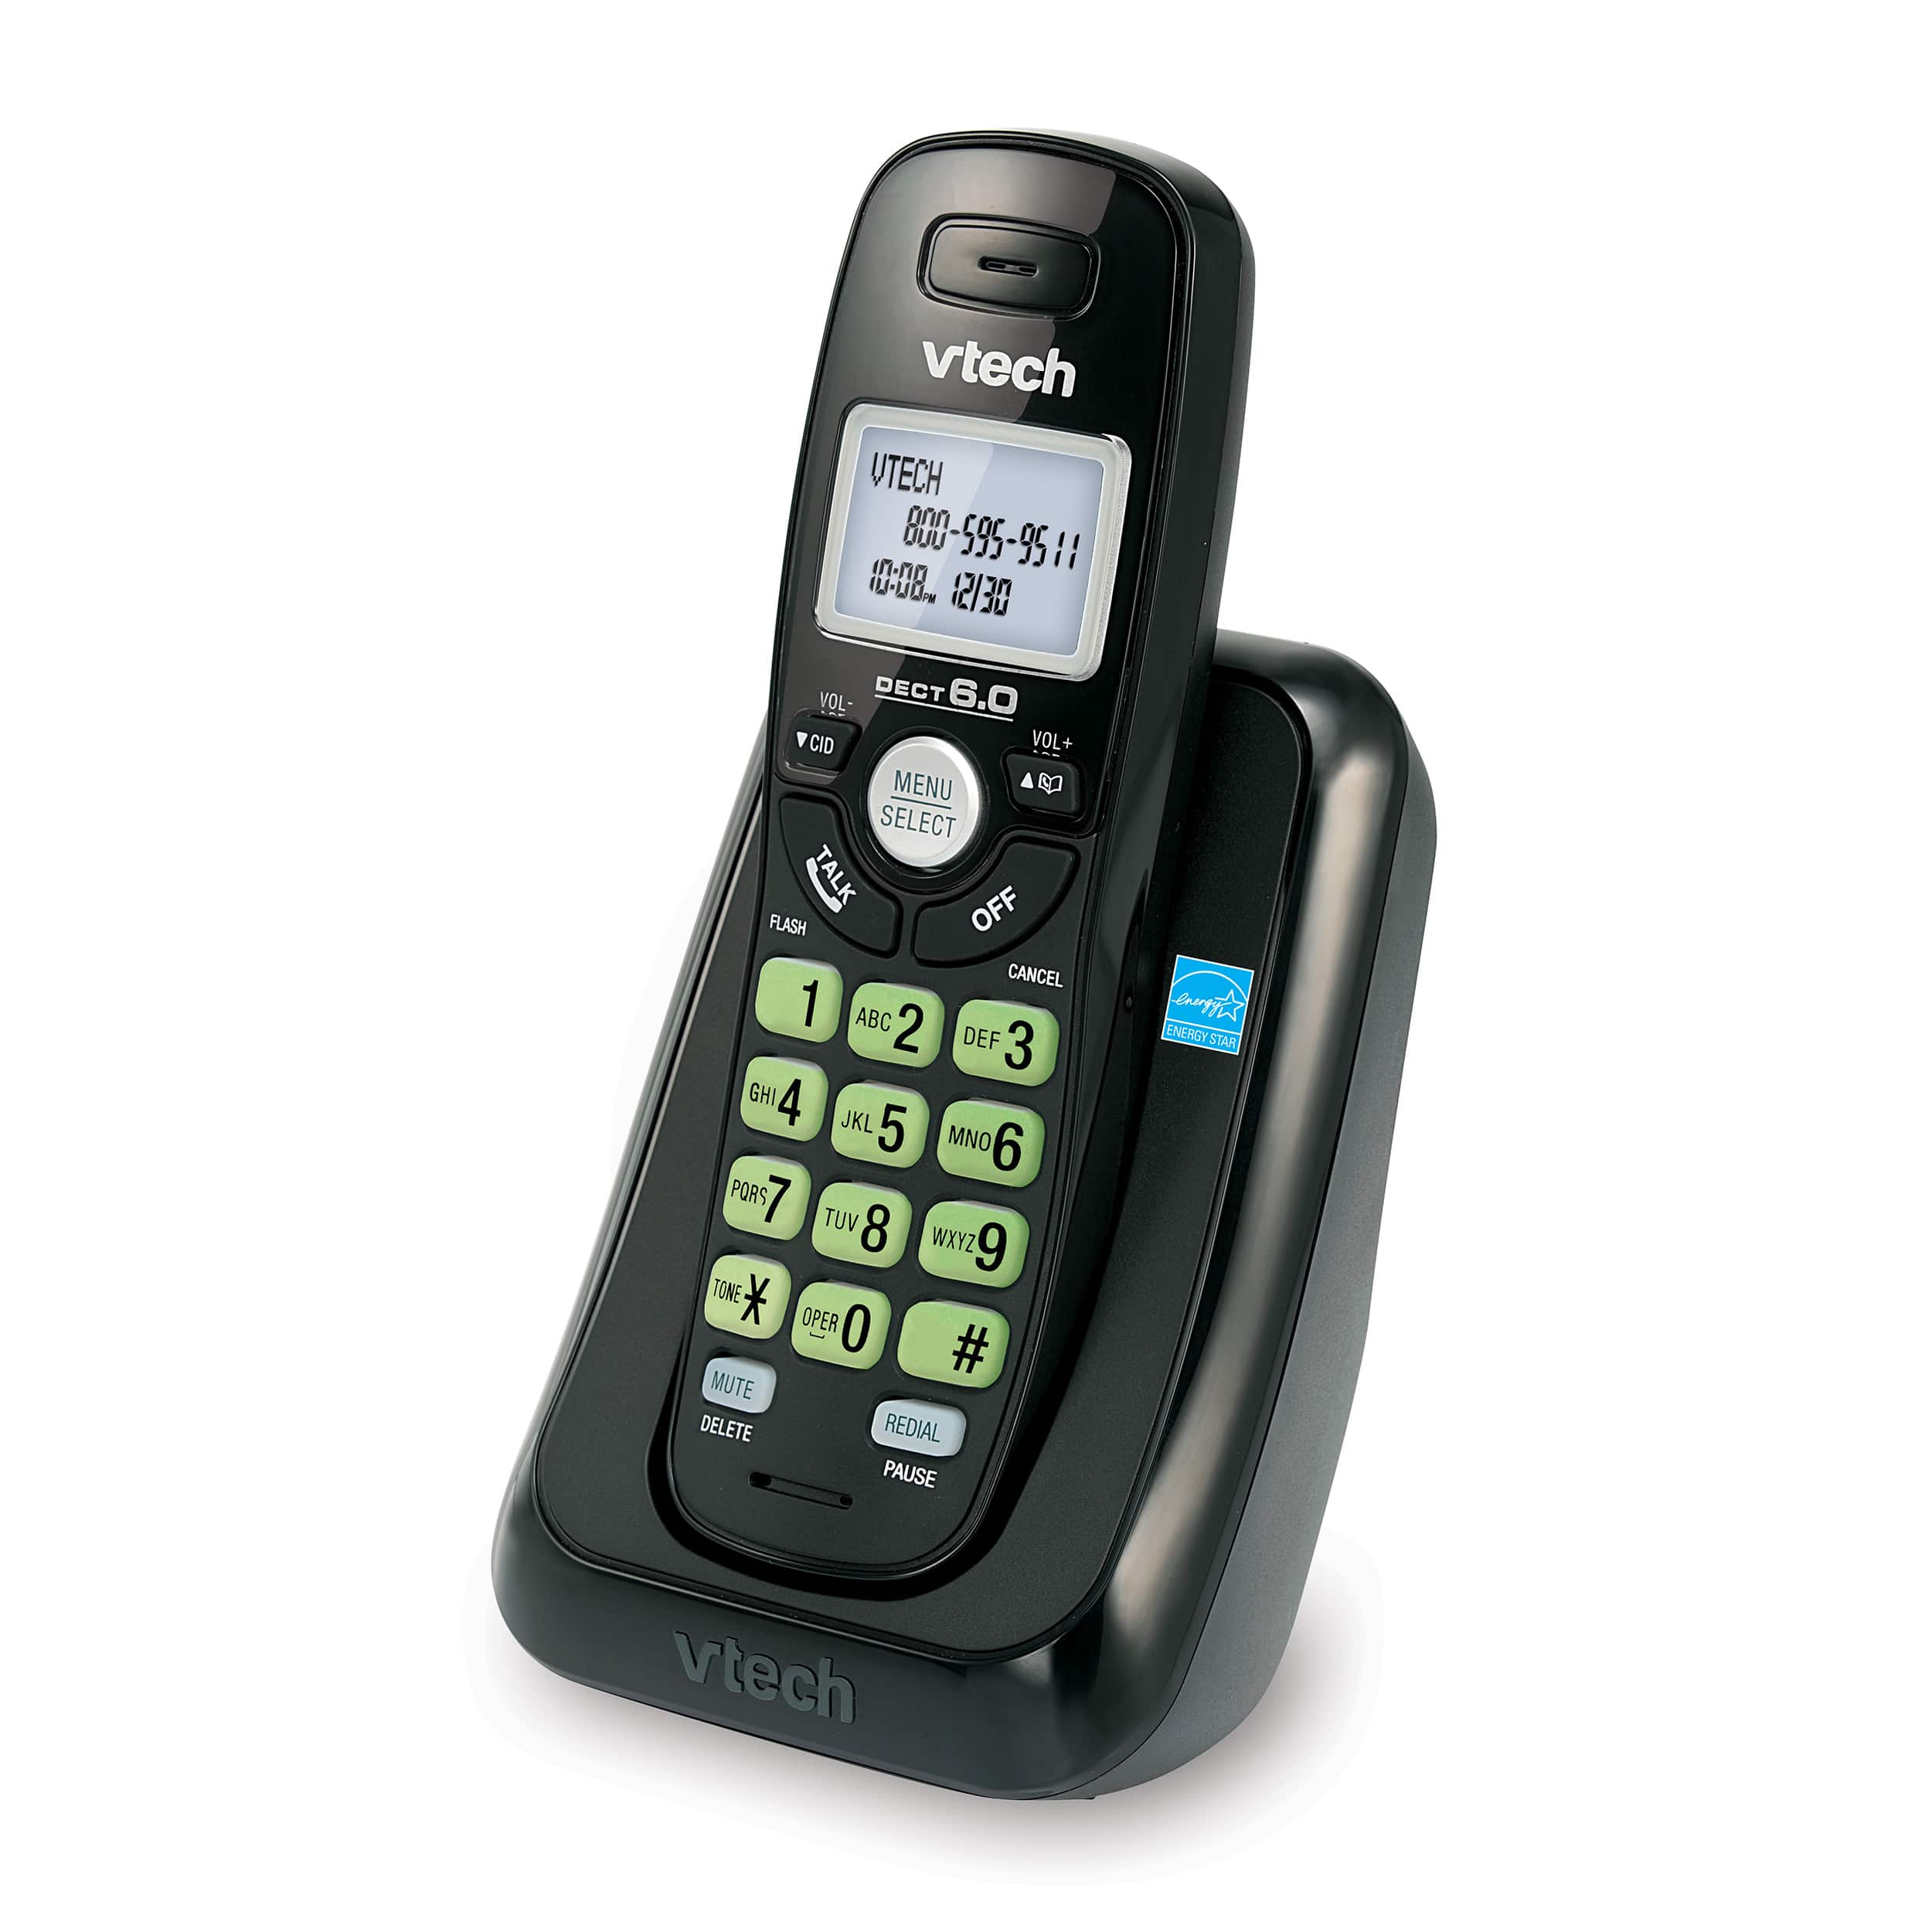 BRAND NEW VTech CS6114 DECT 6.0 Cordless Phone with Caller ID/Call Waiting White 